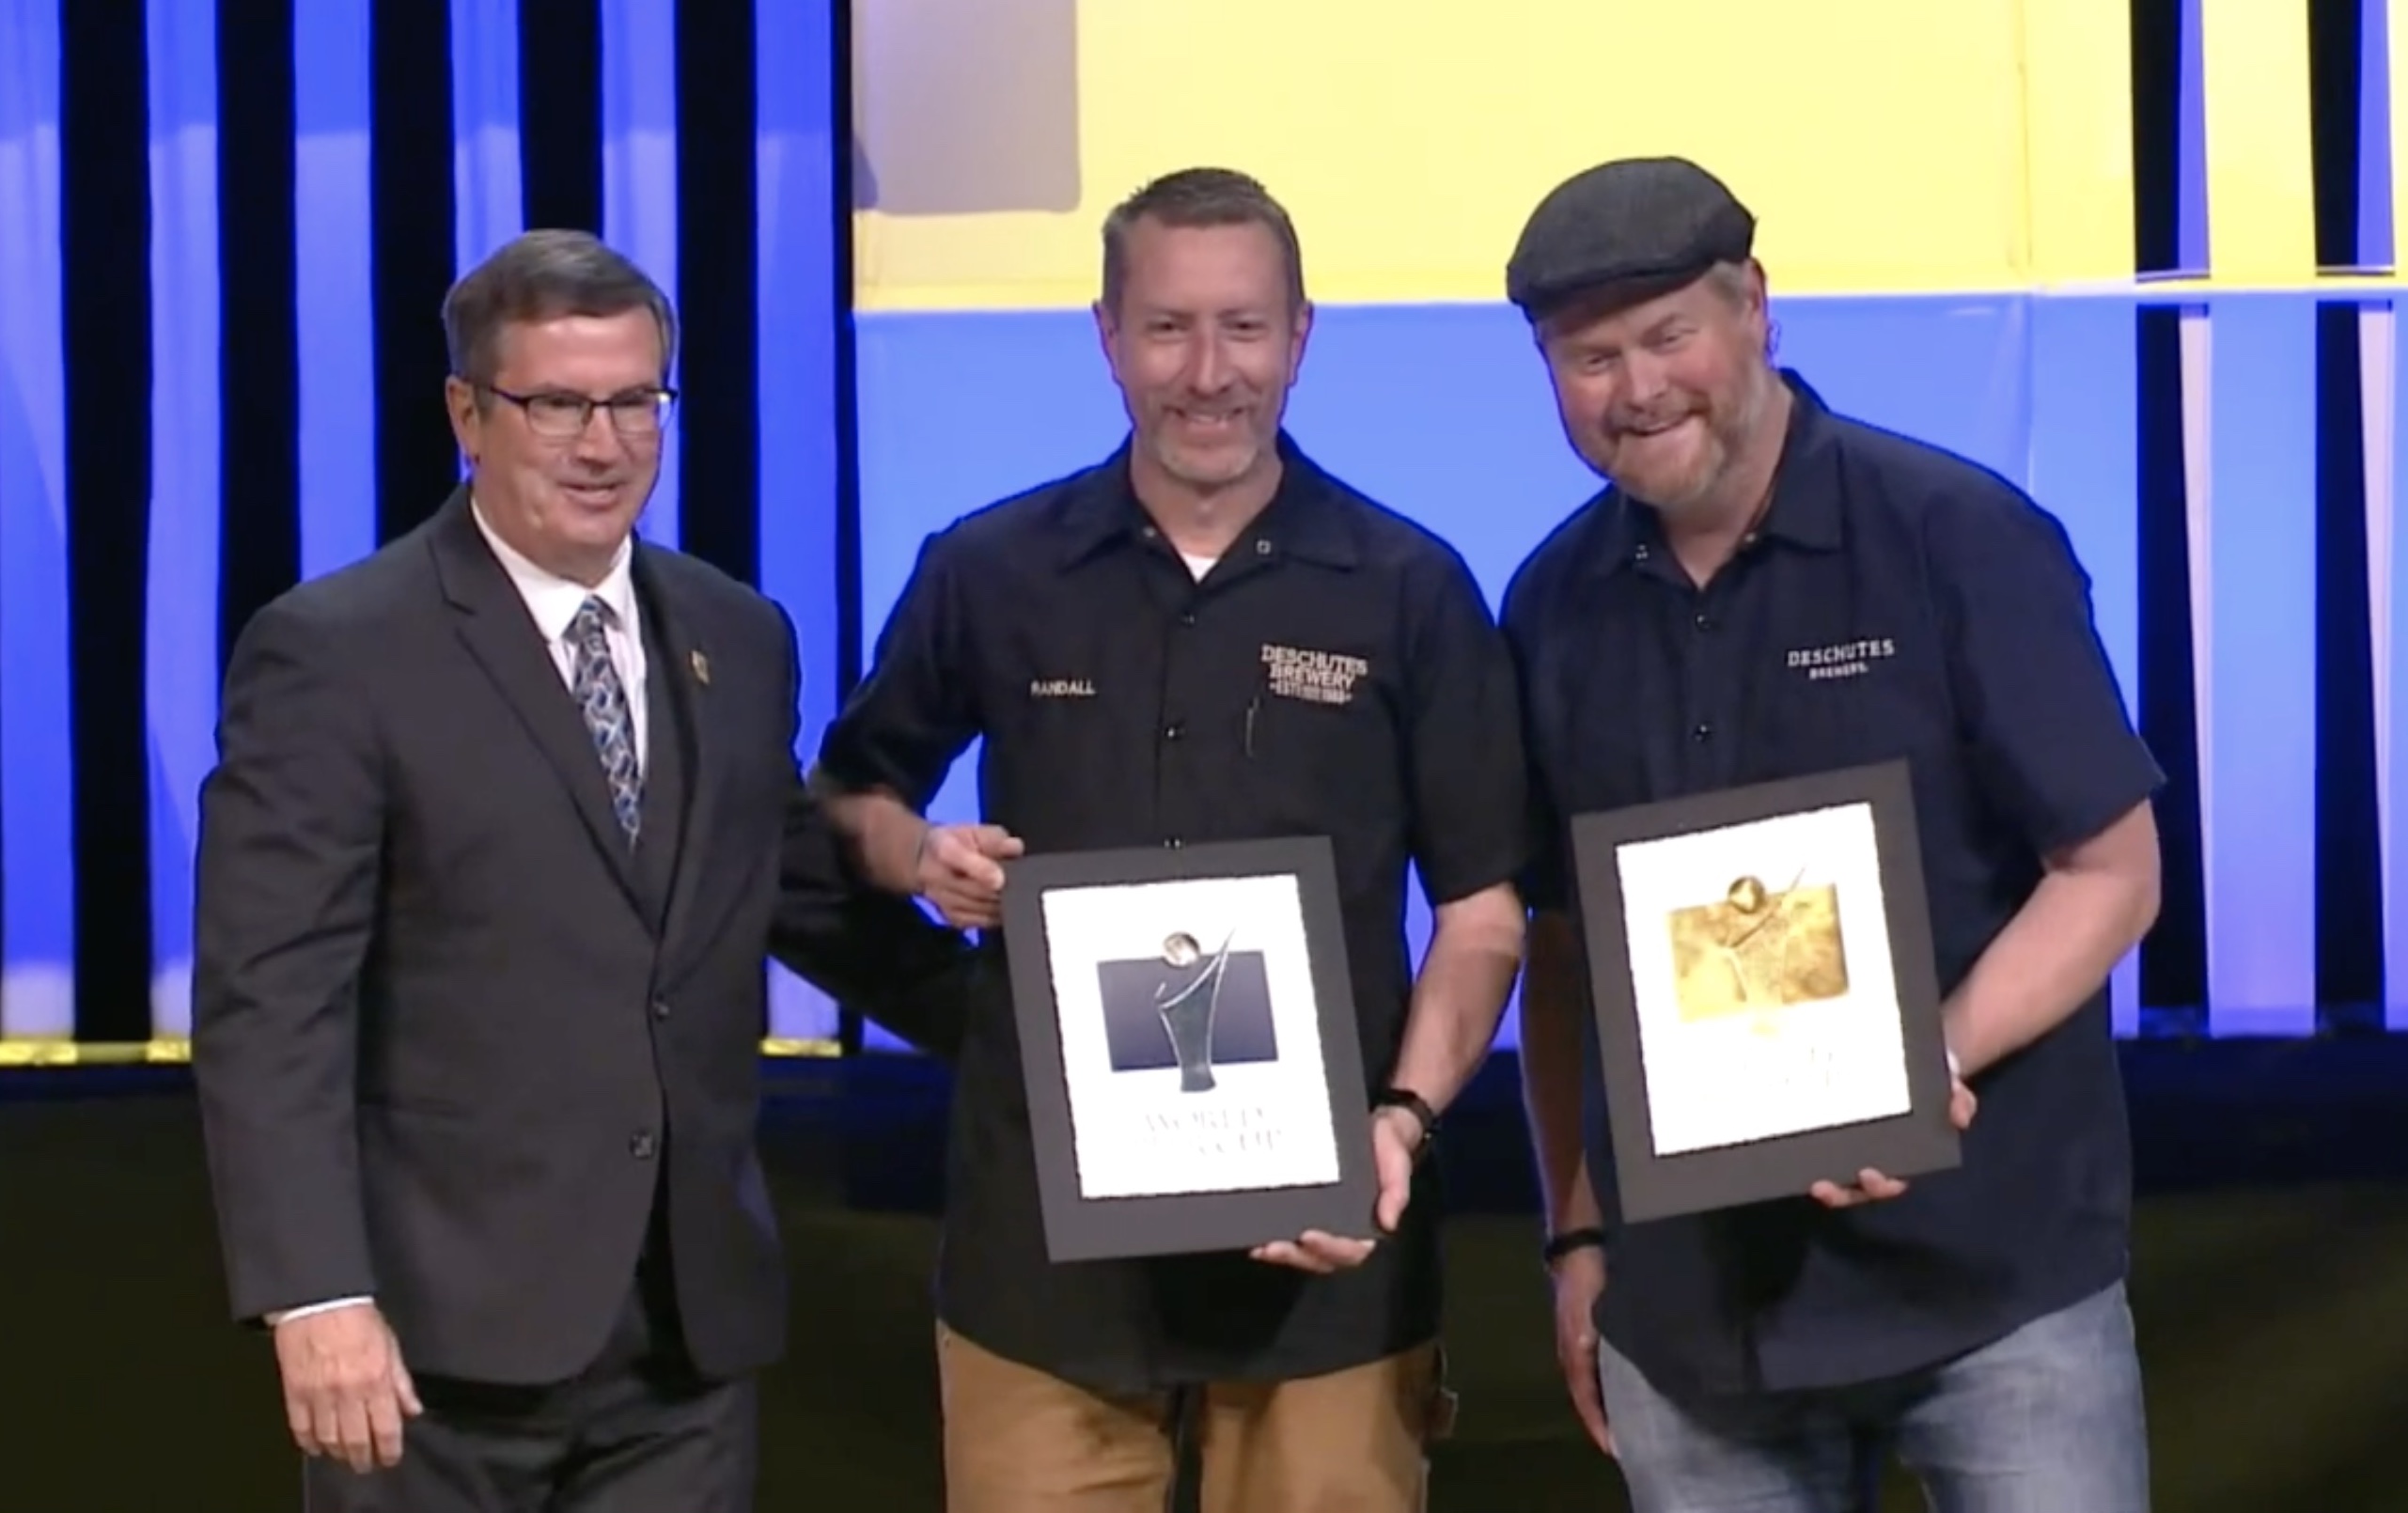 Deschutes Brewery accepting their Gold and Silver Awards at the 2022 World Beer Cup.